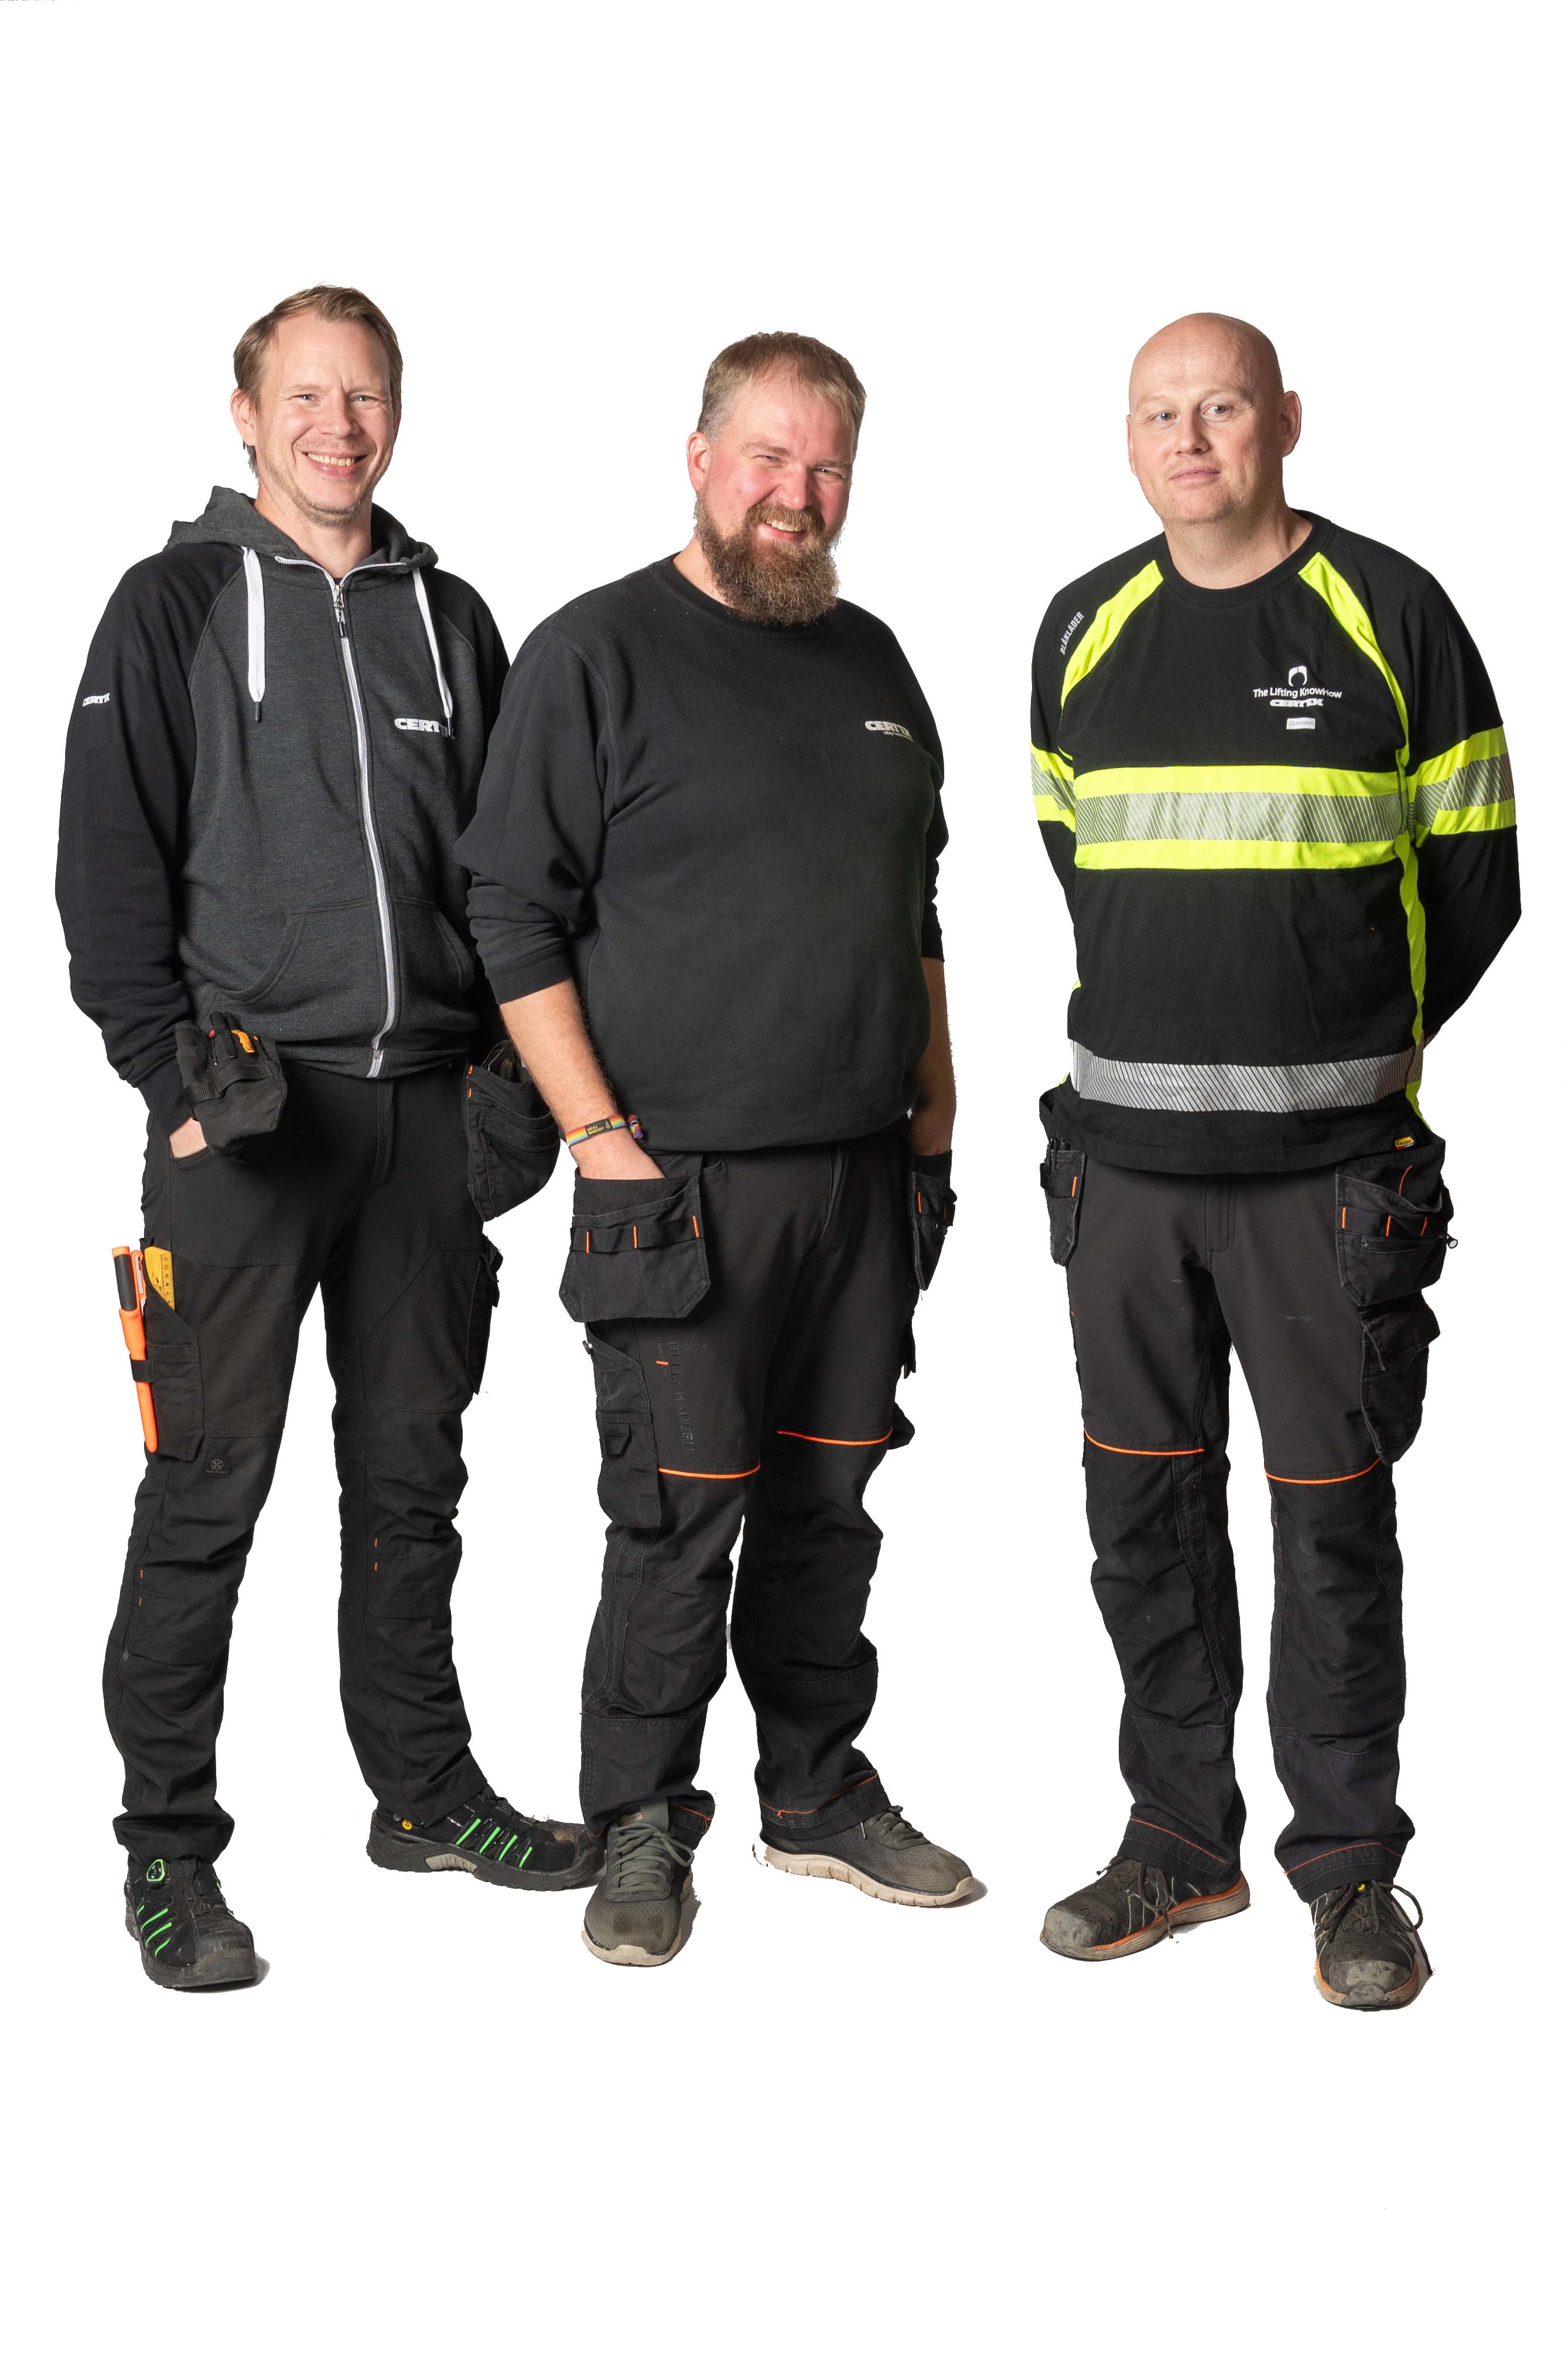 Olav, Kristoffer and Gunnar all stand ready to help you with service on your equipment.